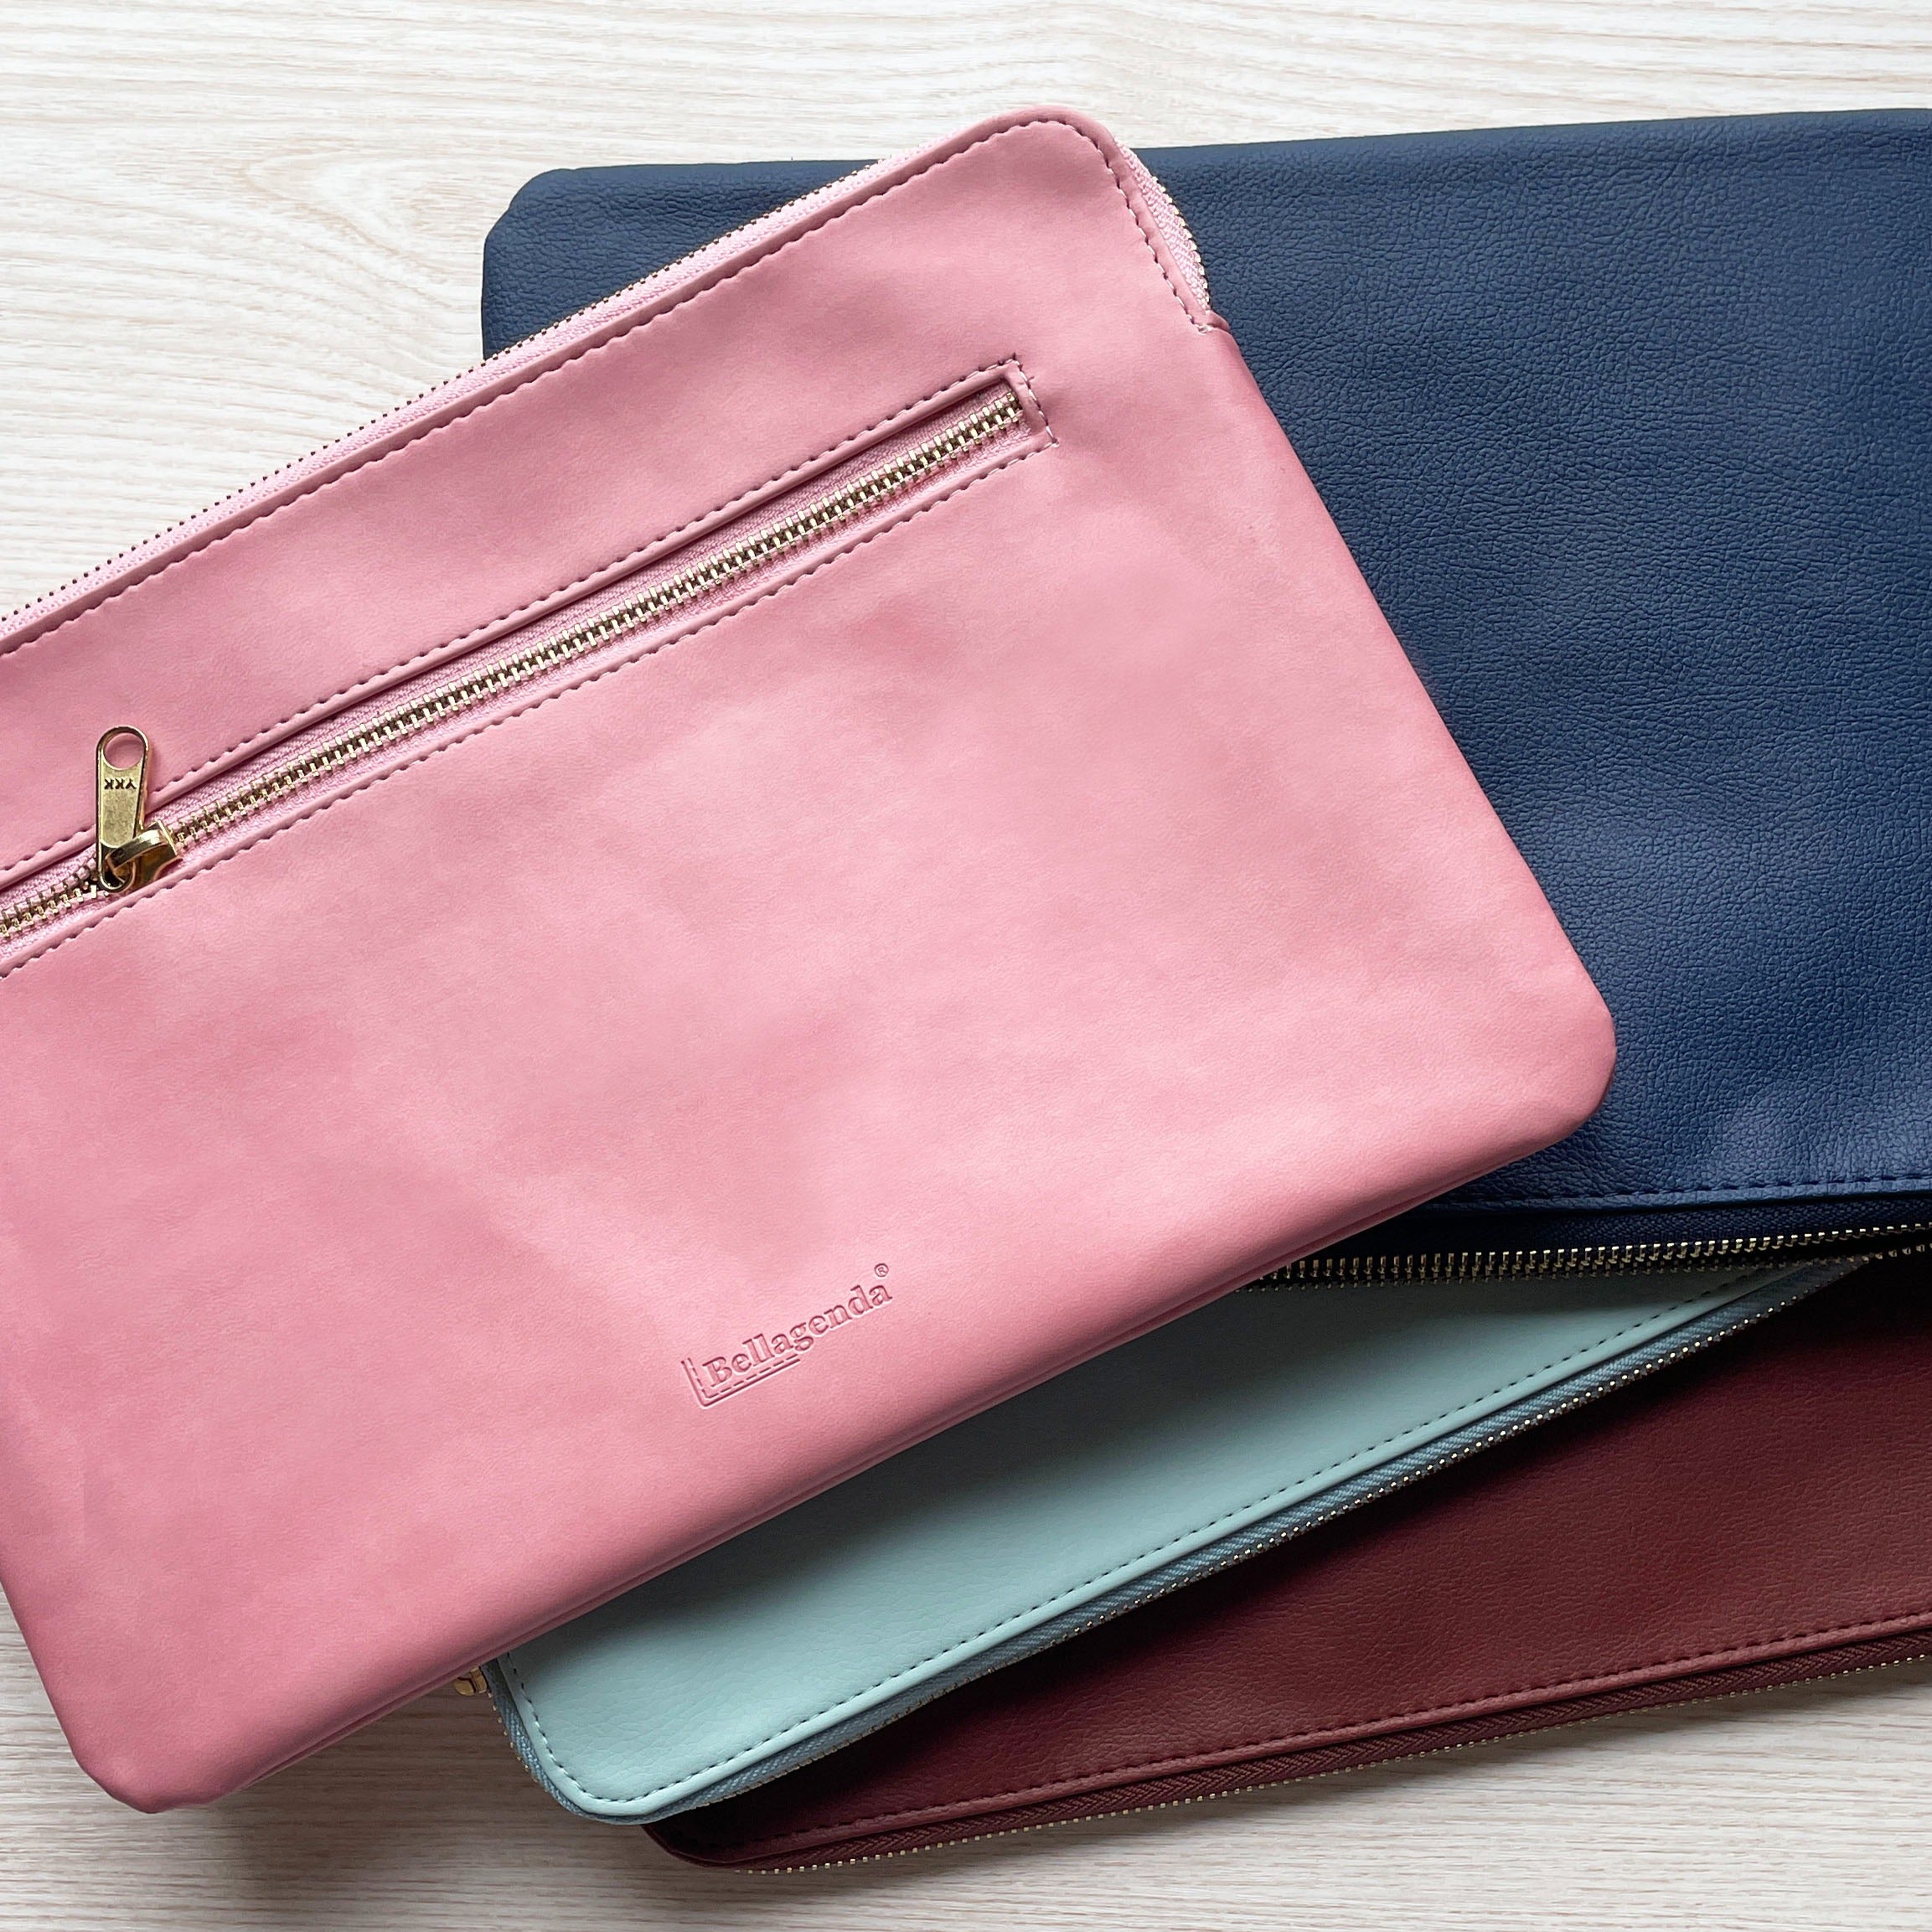 Tablet sleeve with YKK zipper closure and back pocket